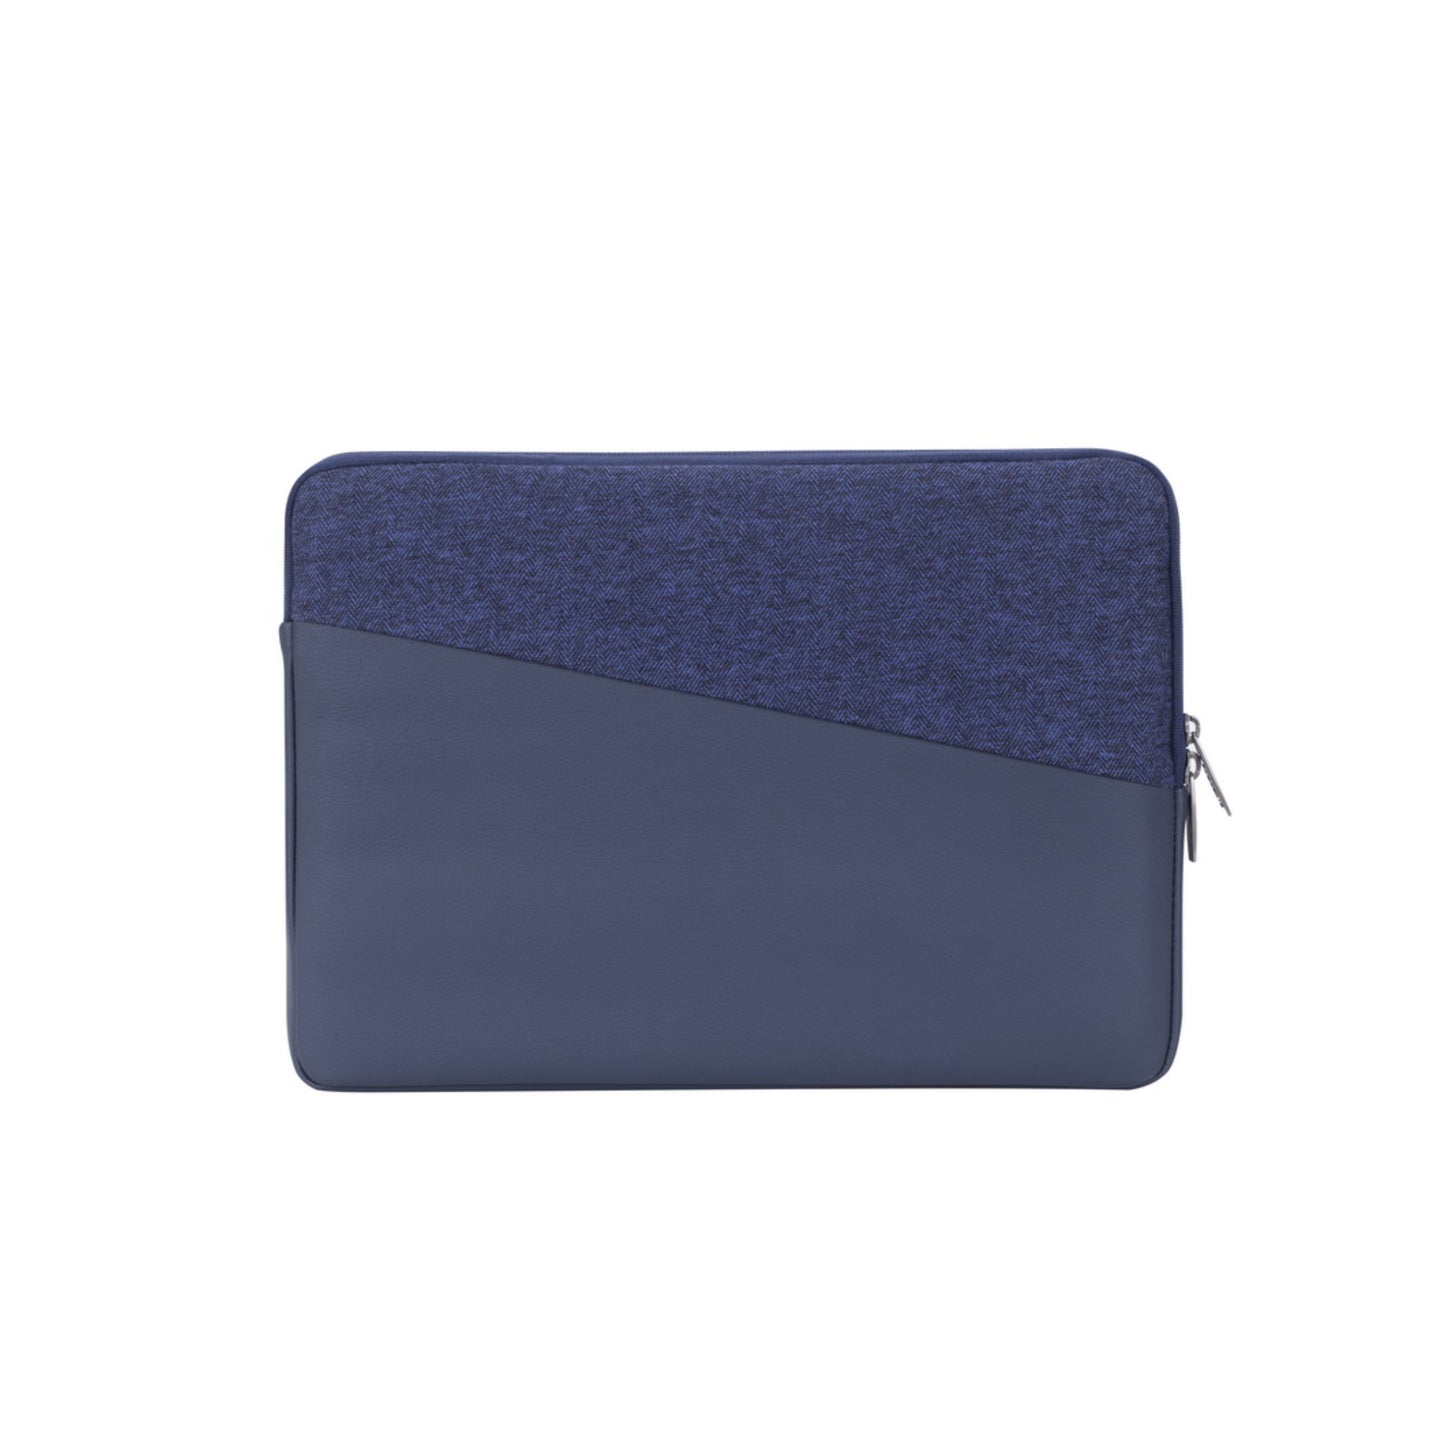 RIVACASE 7903 Laptop Sleeves 14/13 - Blue